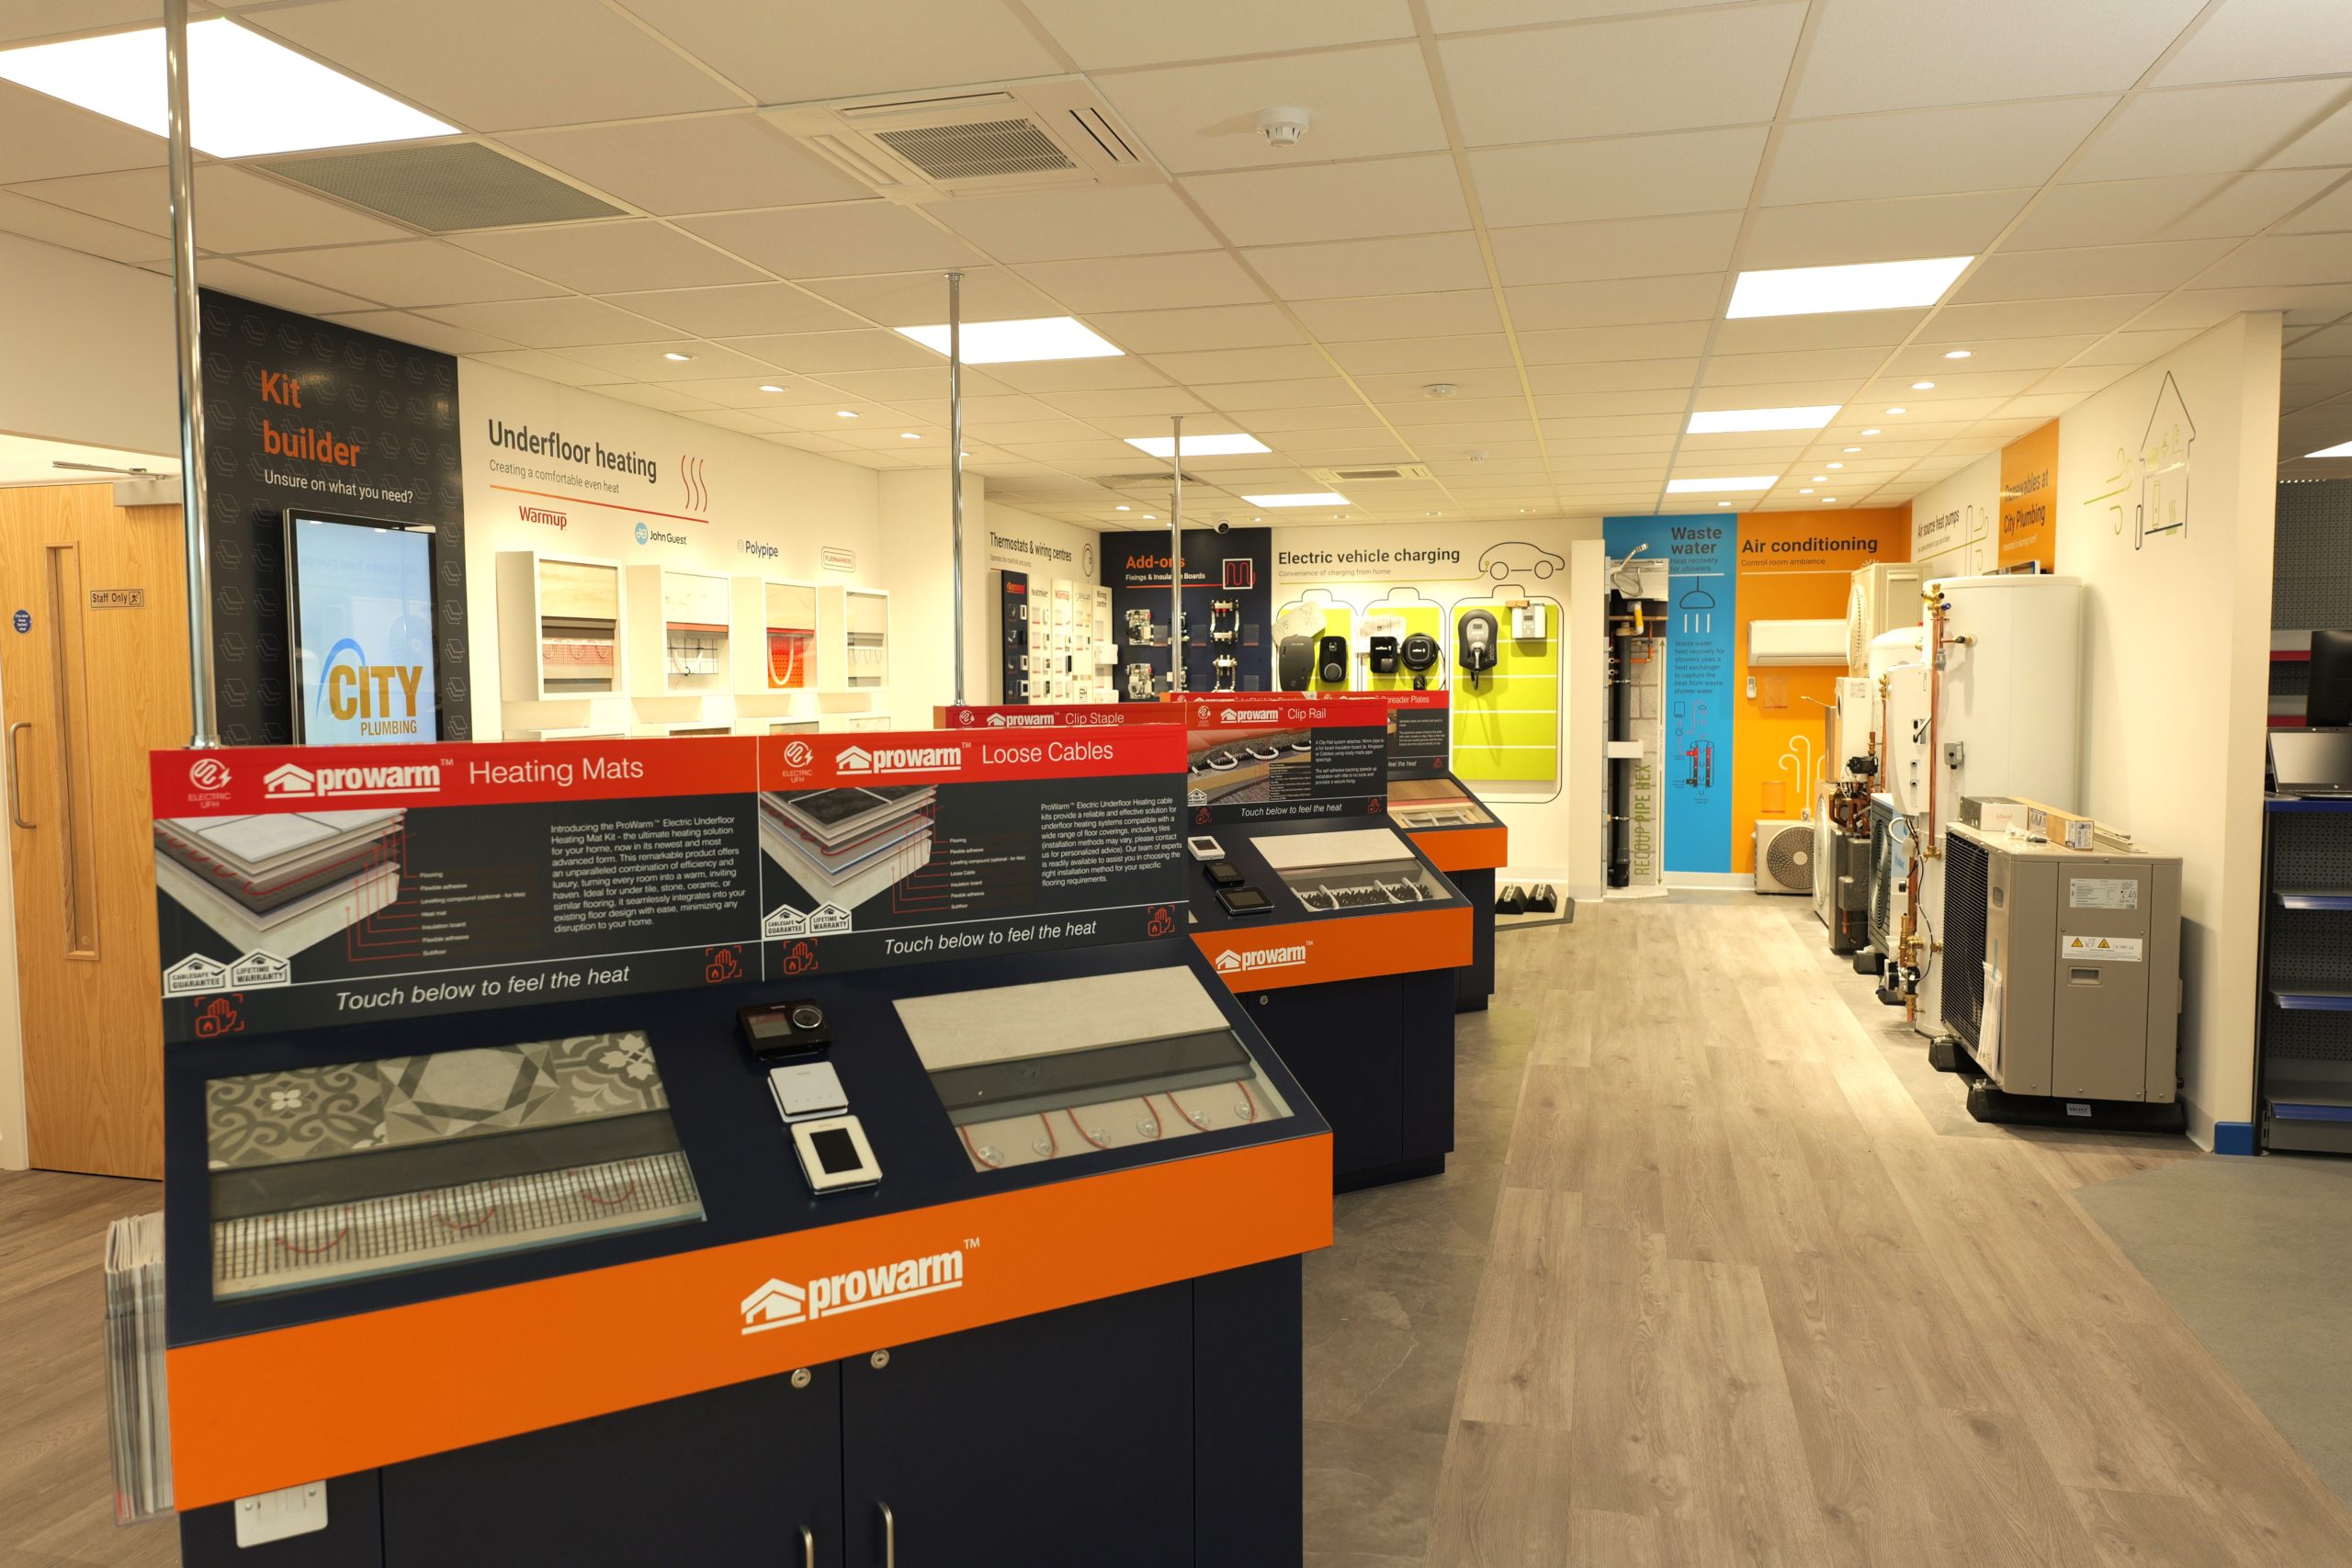 Coupled with a Renewables Centre, Underfloor Heating Store and The Bathroom Showroom, City Plumbing has opened its new branch in Basildon. The business has also revealed details of its latest Renewables Trade Day, held recently at its depot in Bournemouth.